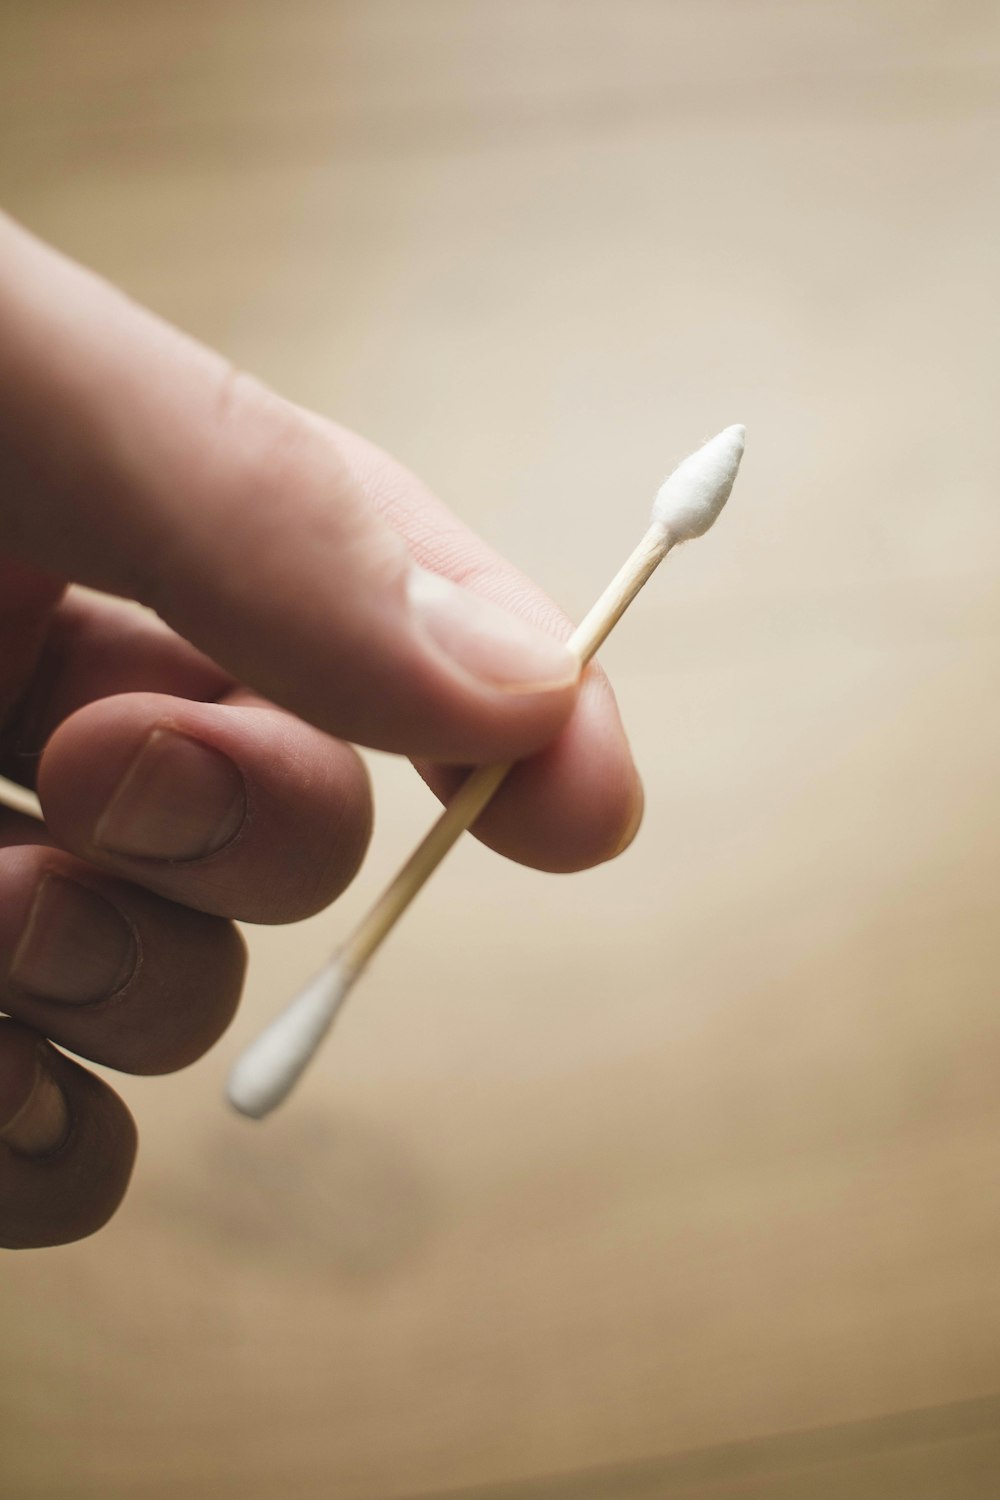 person holding white cotton buds